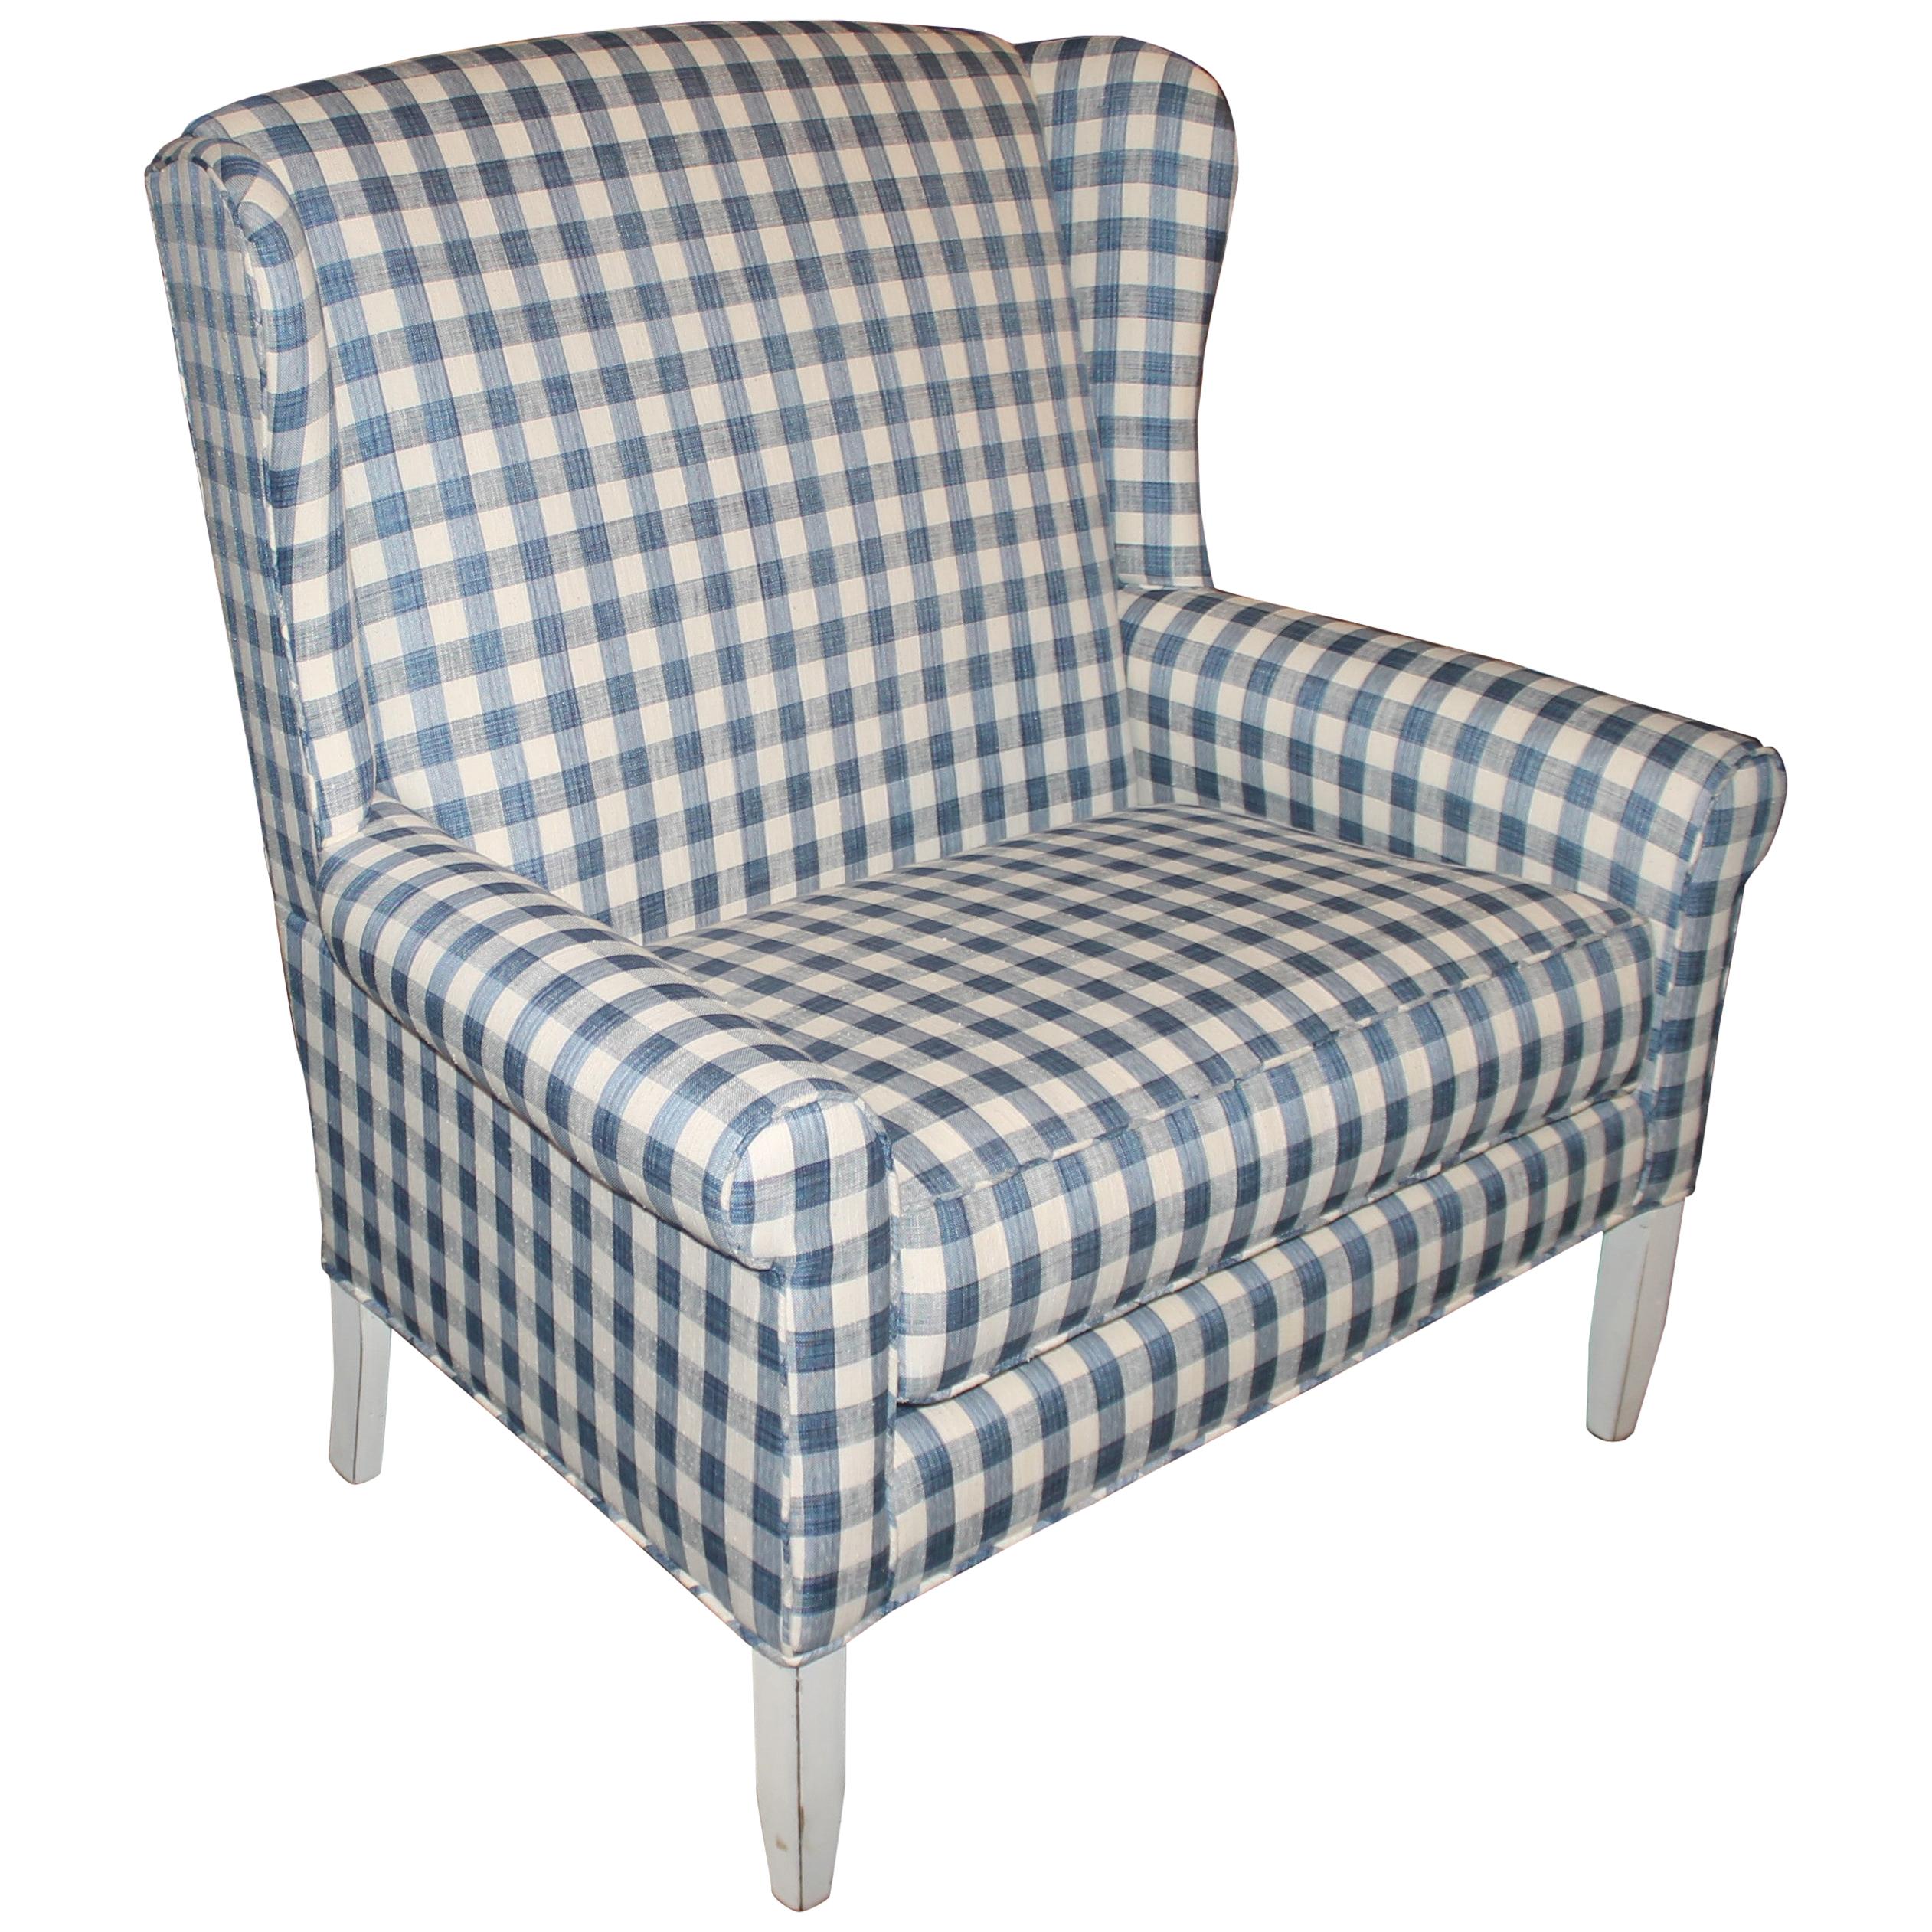 20th C Wingback Love Seat in Blue and White Check Homespun Linen For Sale